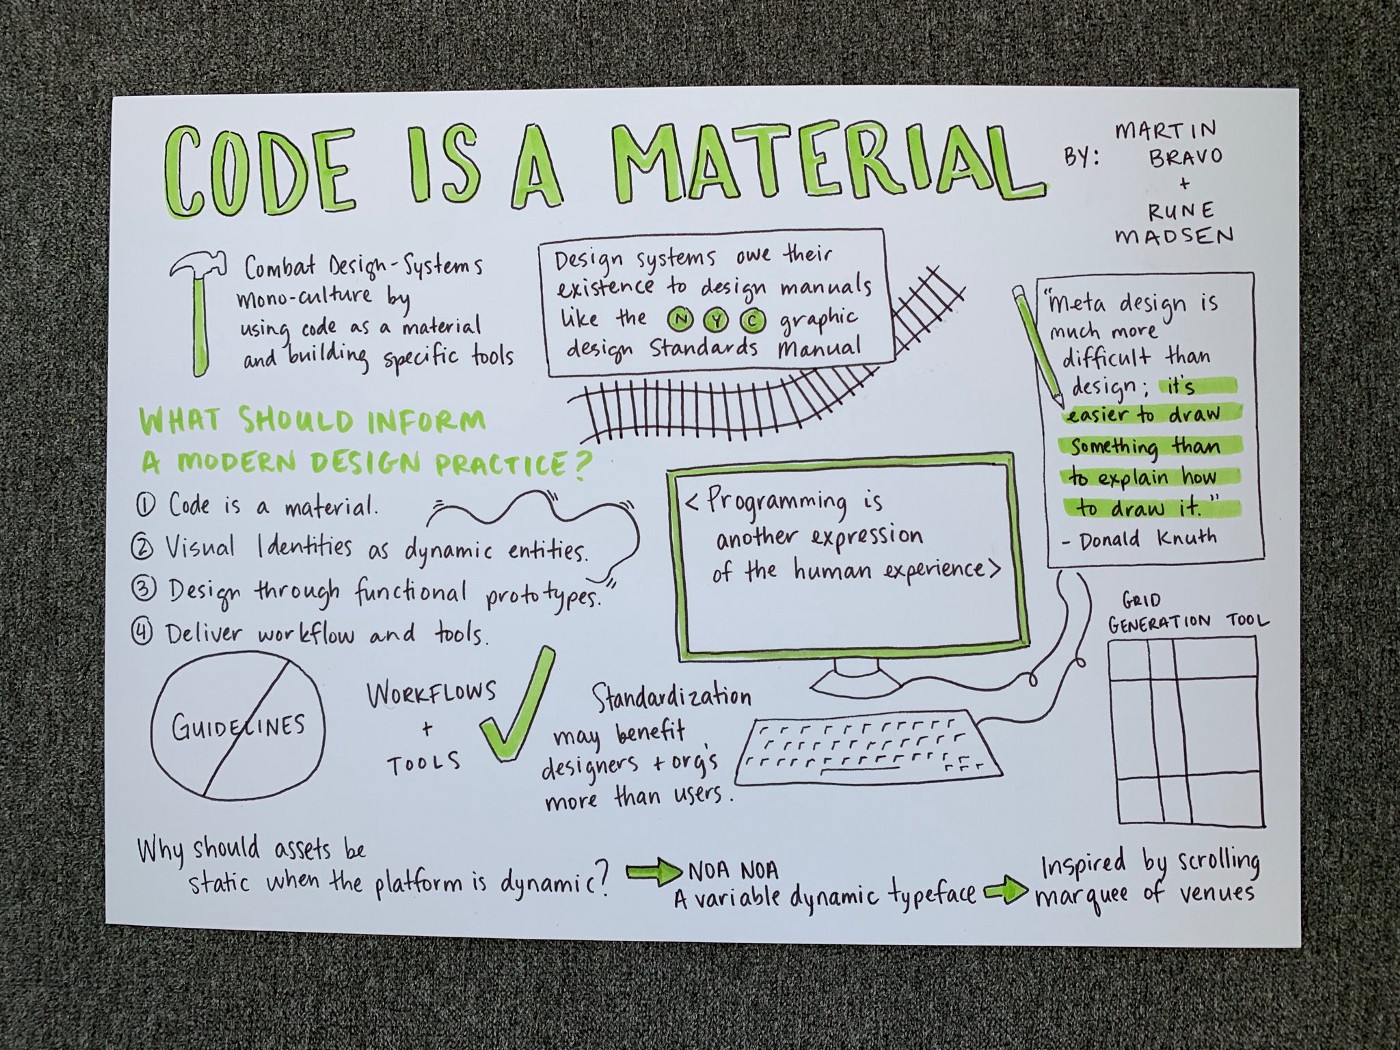 A page of handwritten notes and drawings titled, "Code Is a Material"